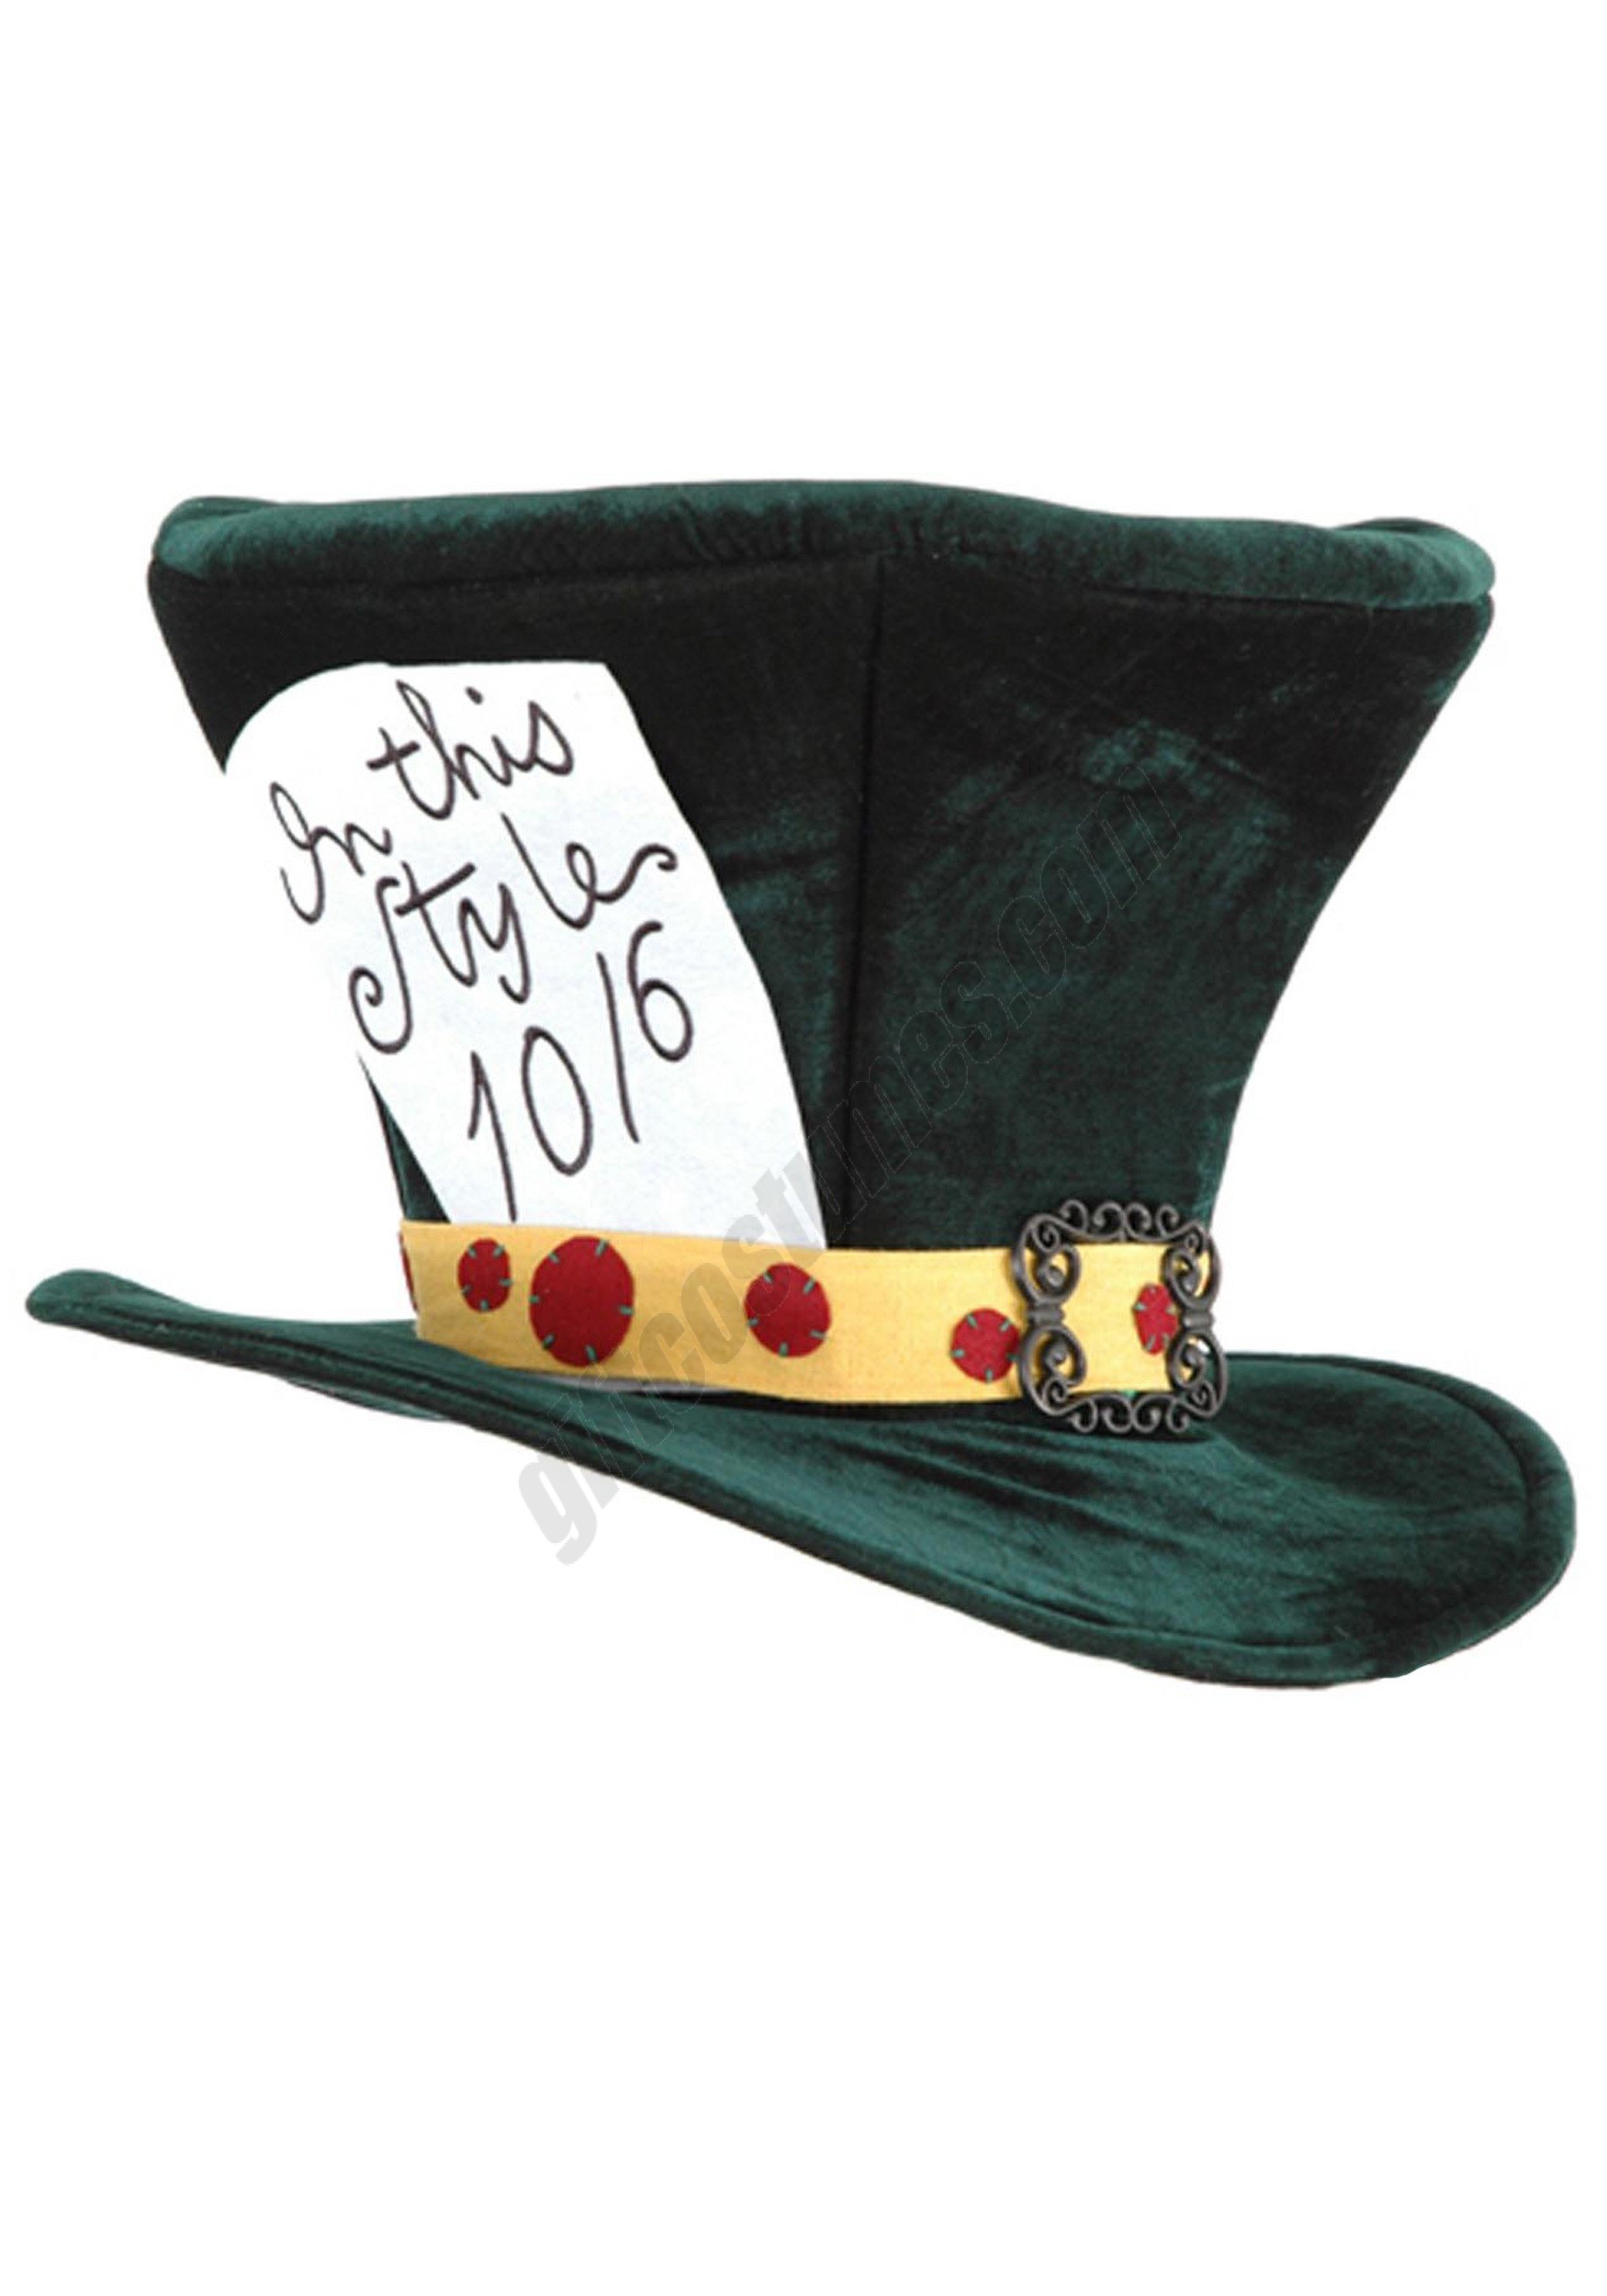 Mad Hatter Adult Hat Promotions - Mad Hatter Adult Hat Promotions